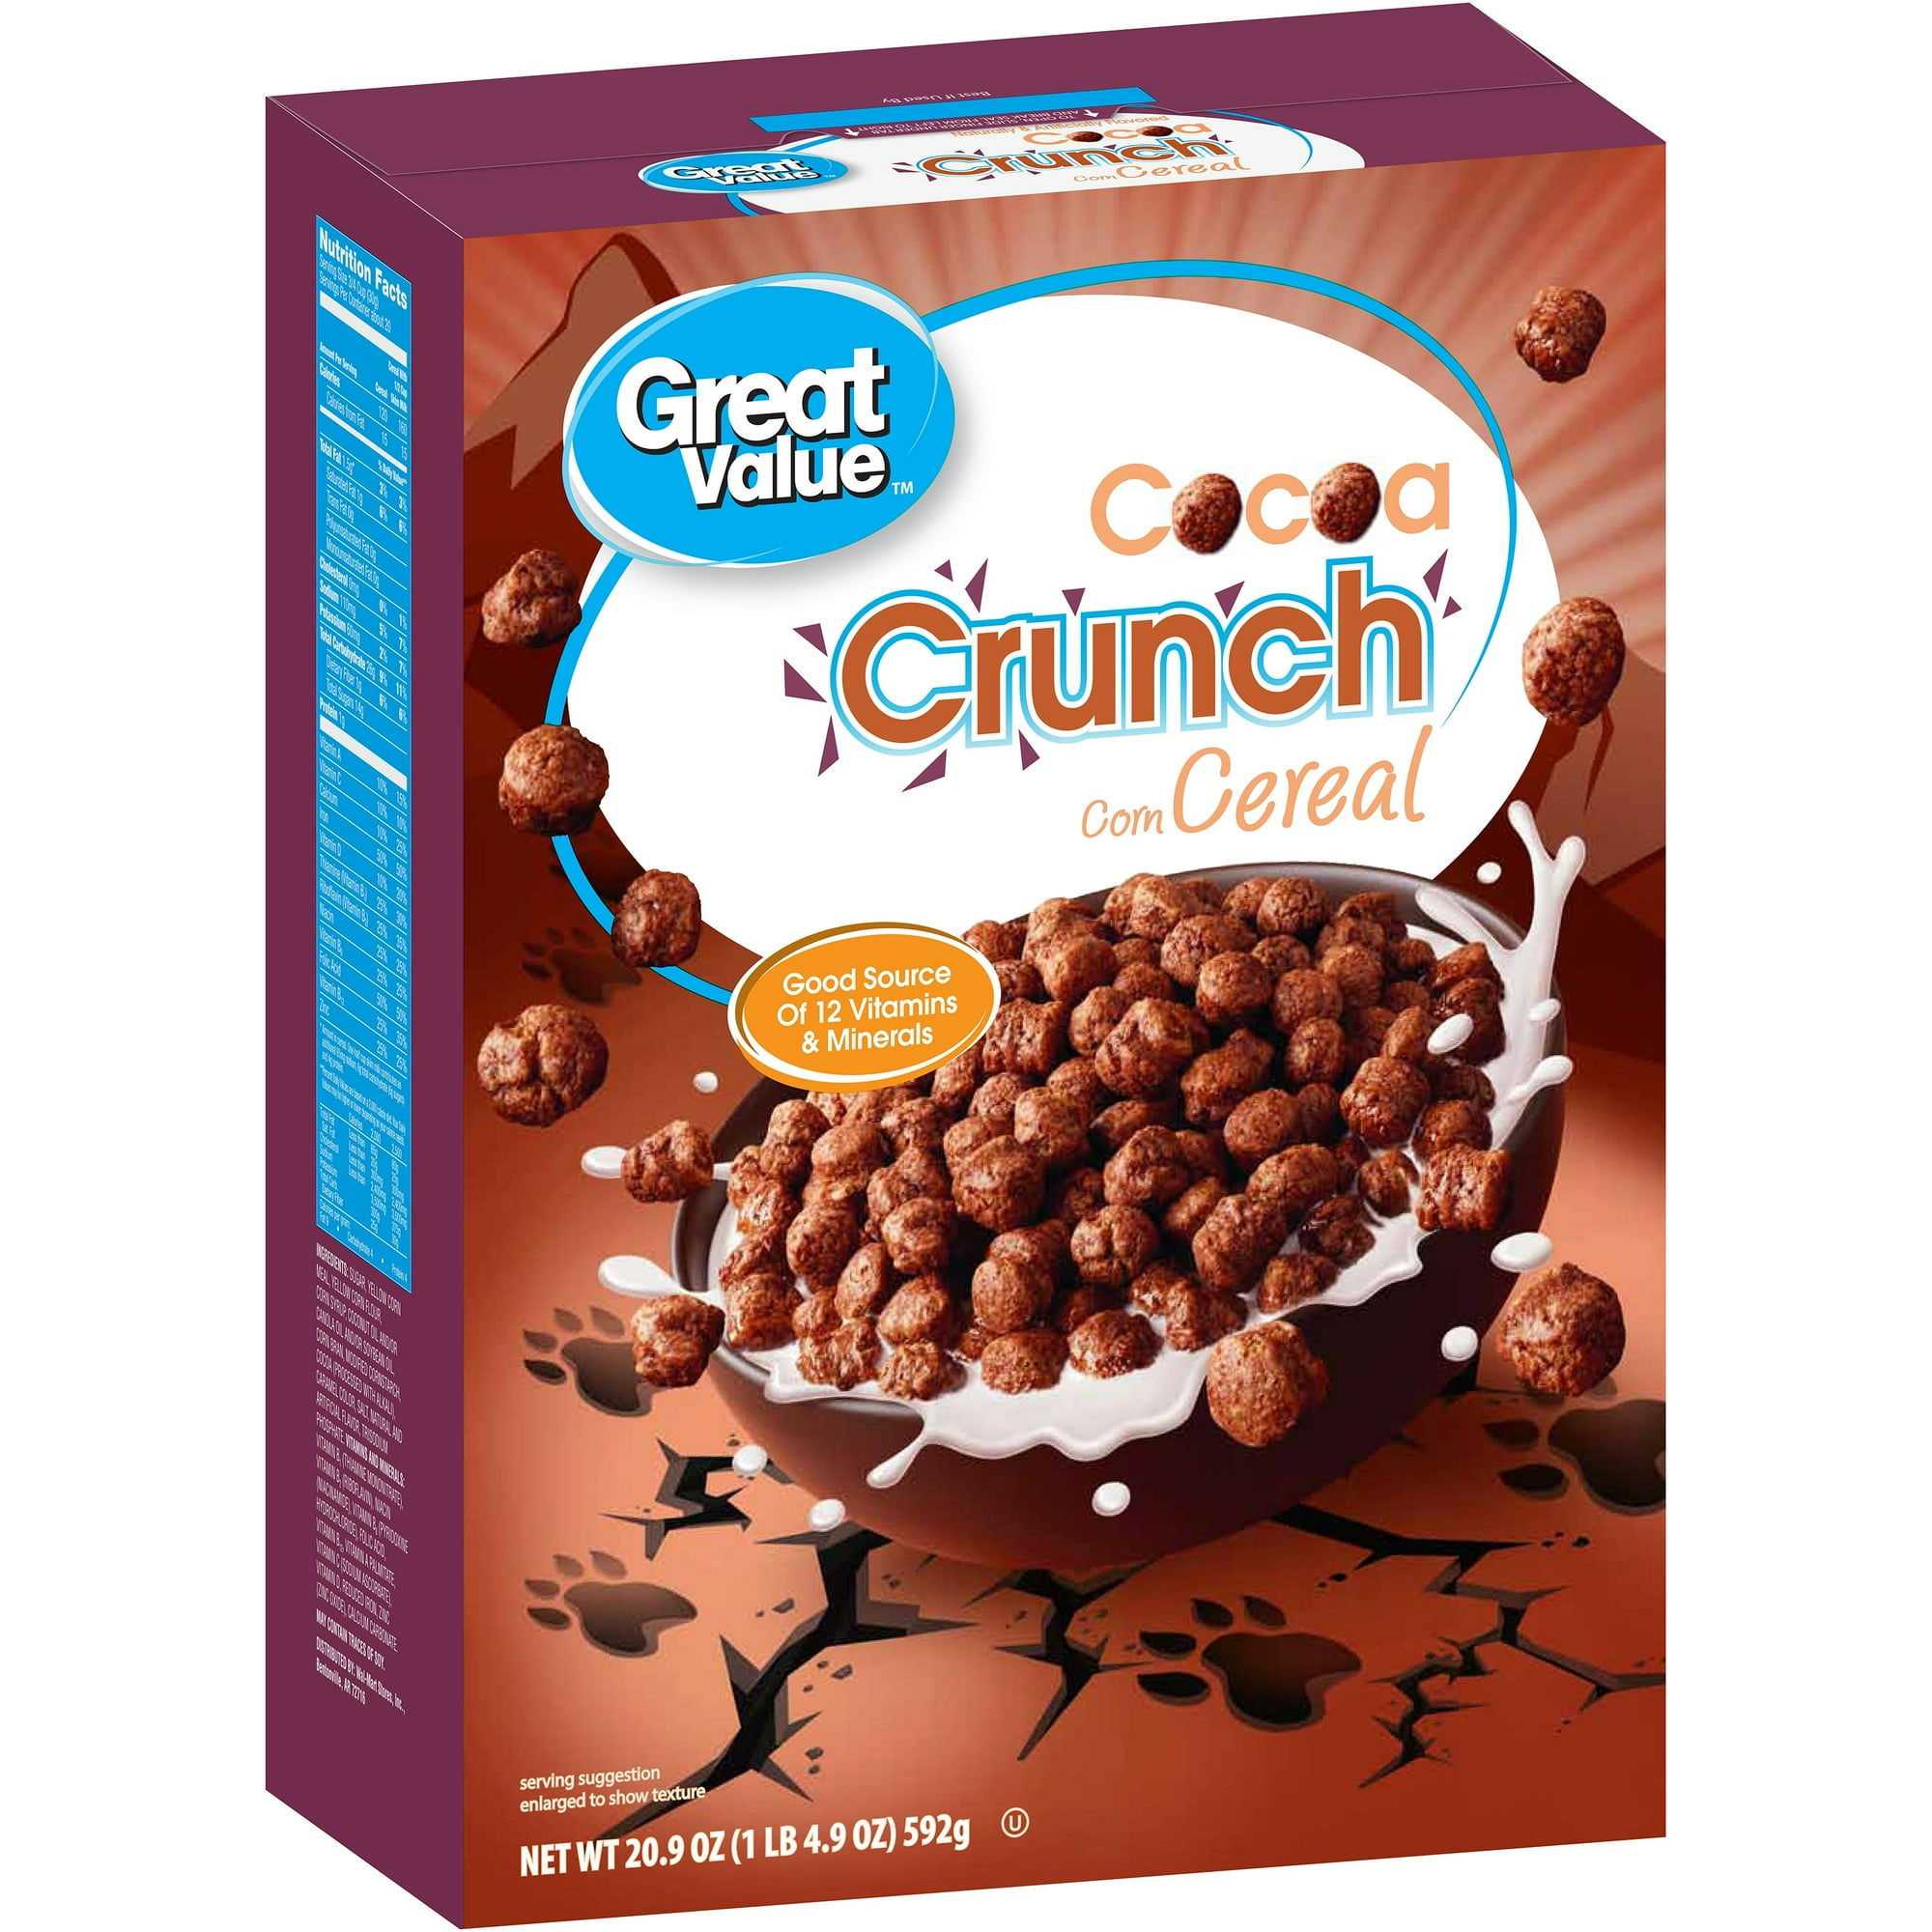 Great Value Cocoa Crunch Cereal, 20.9 oz